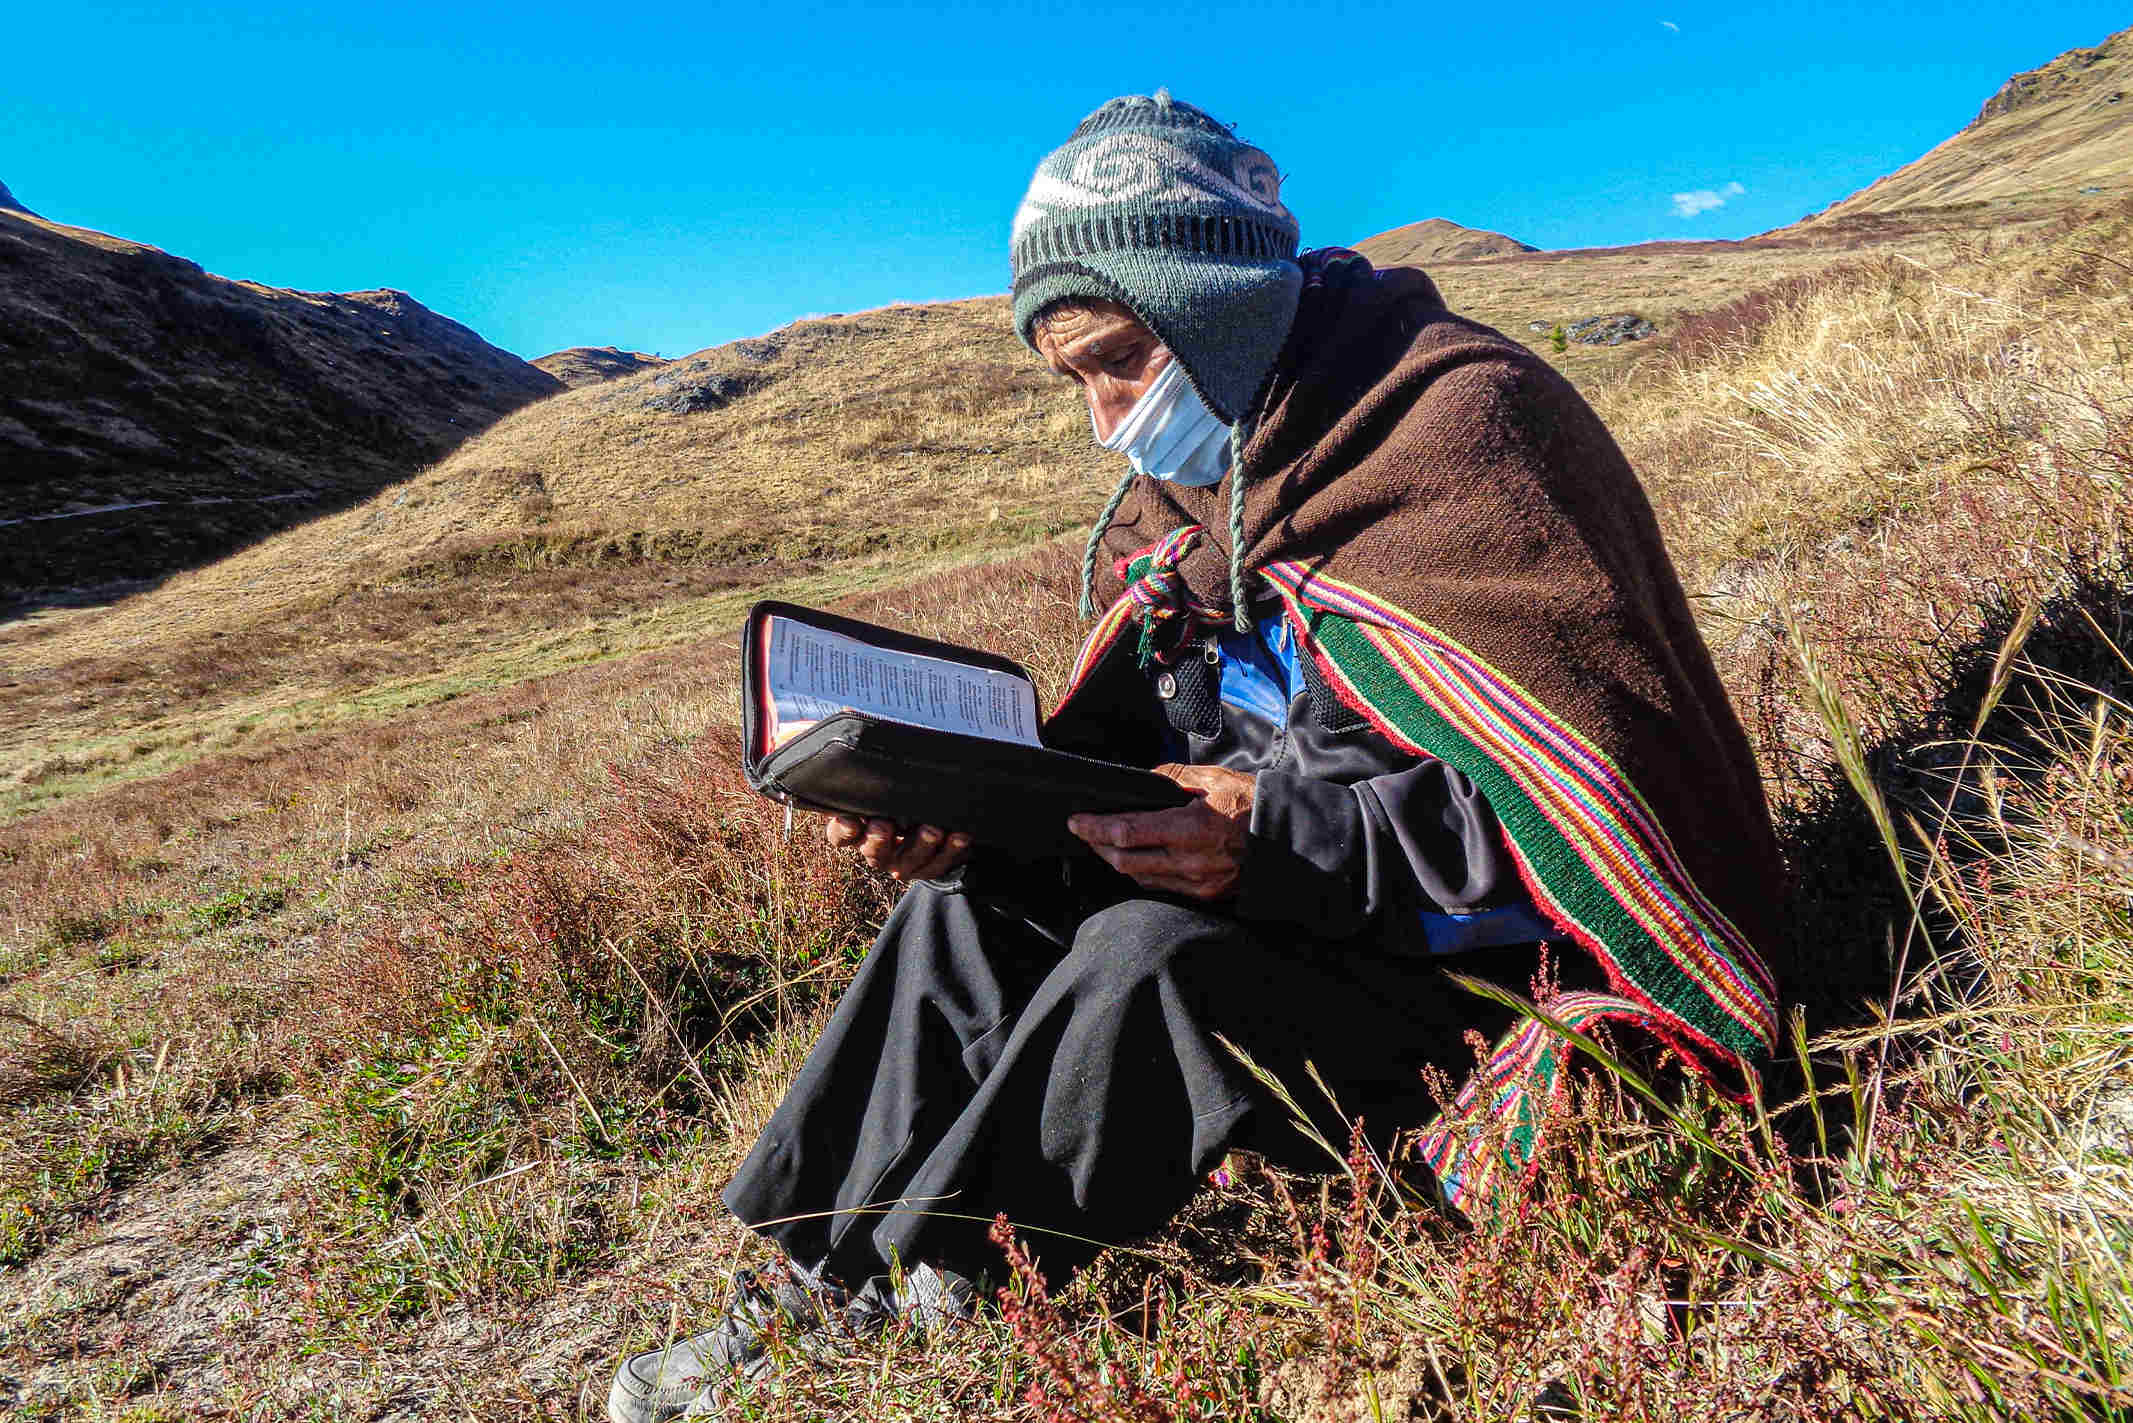 A Peruvian Christian missionary sitting in a grassy valley wearing a shaw reading his Bible